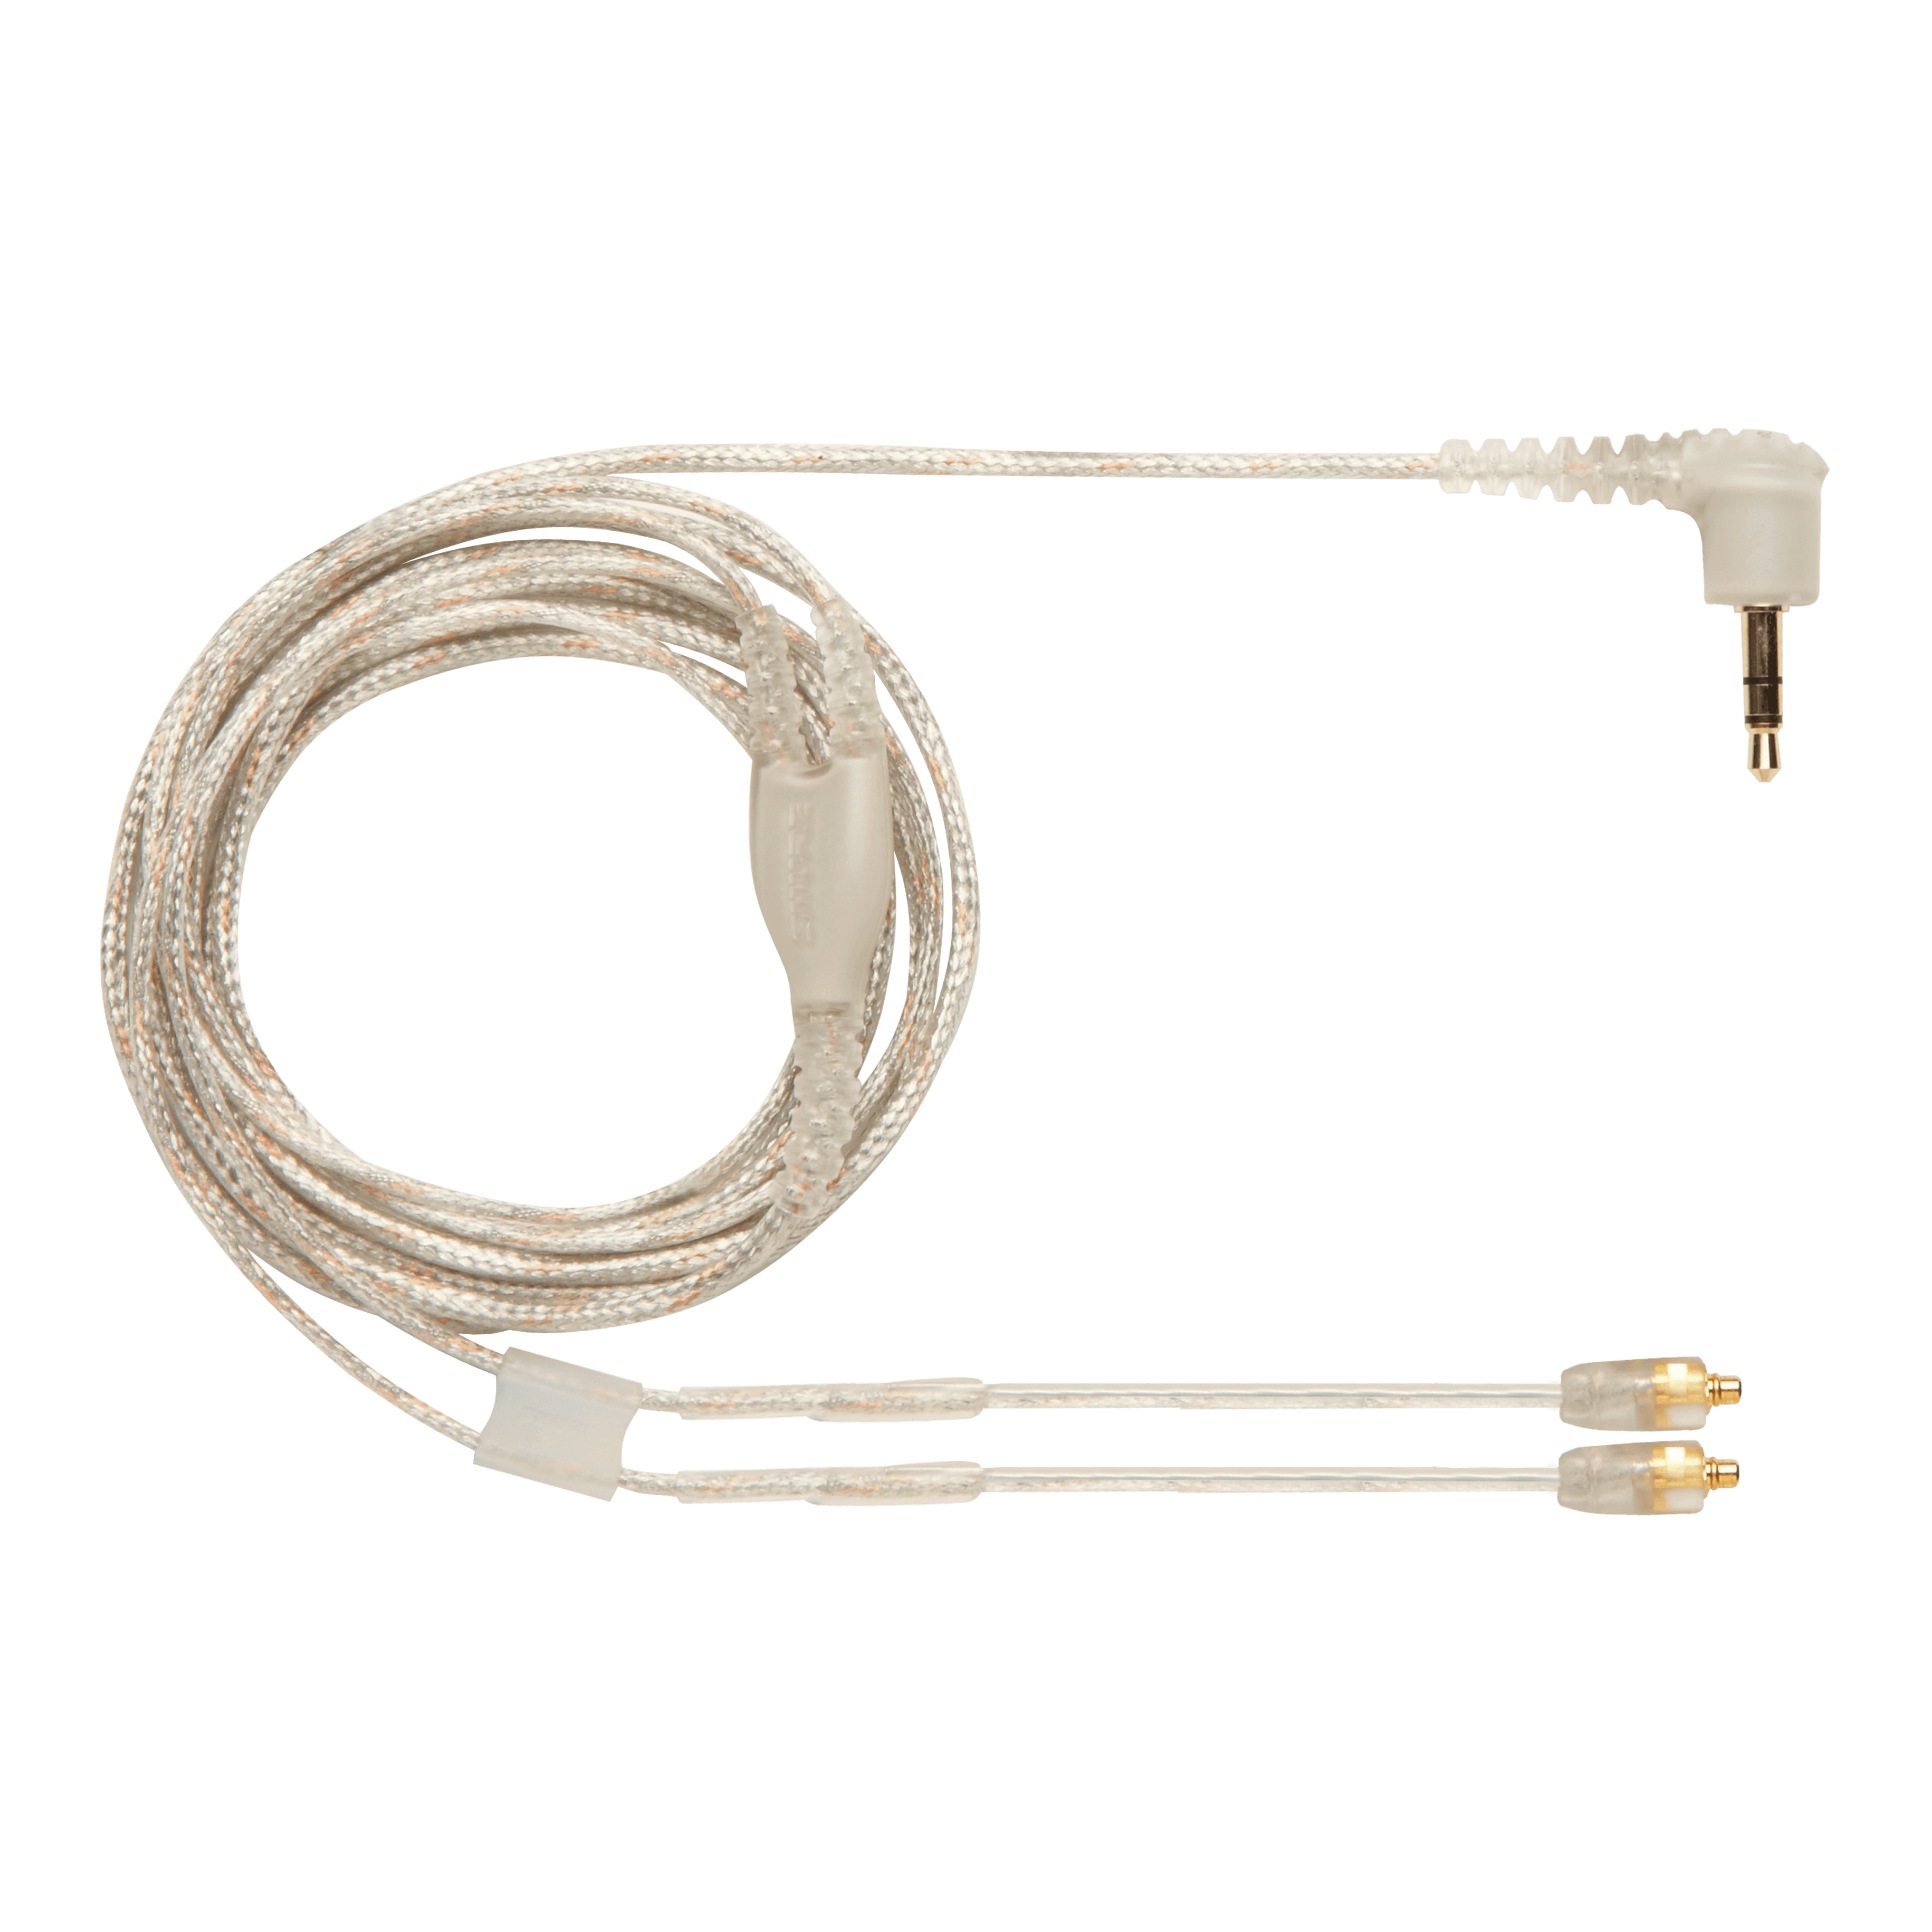 EAC64 - Earphones Replacement Cable - Shure USA